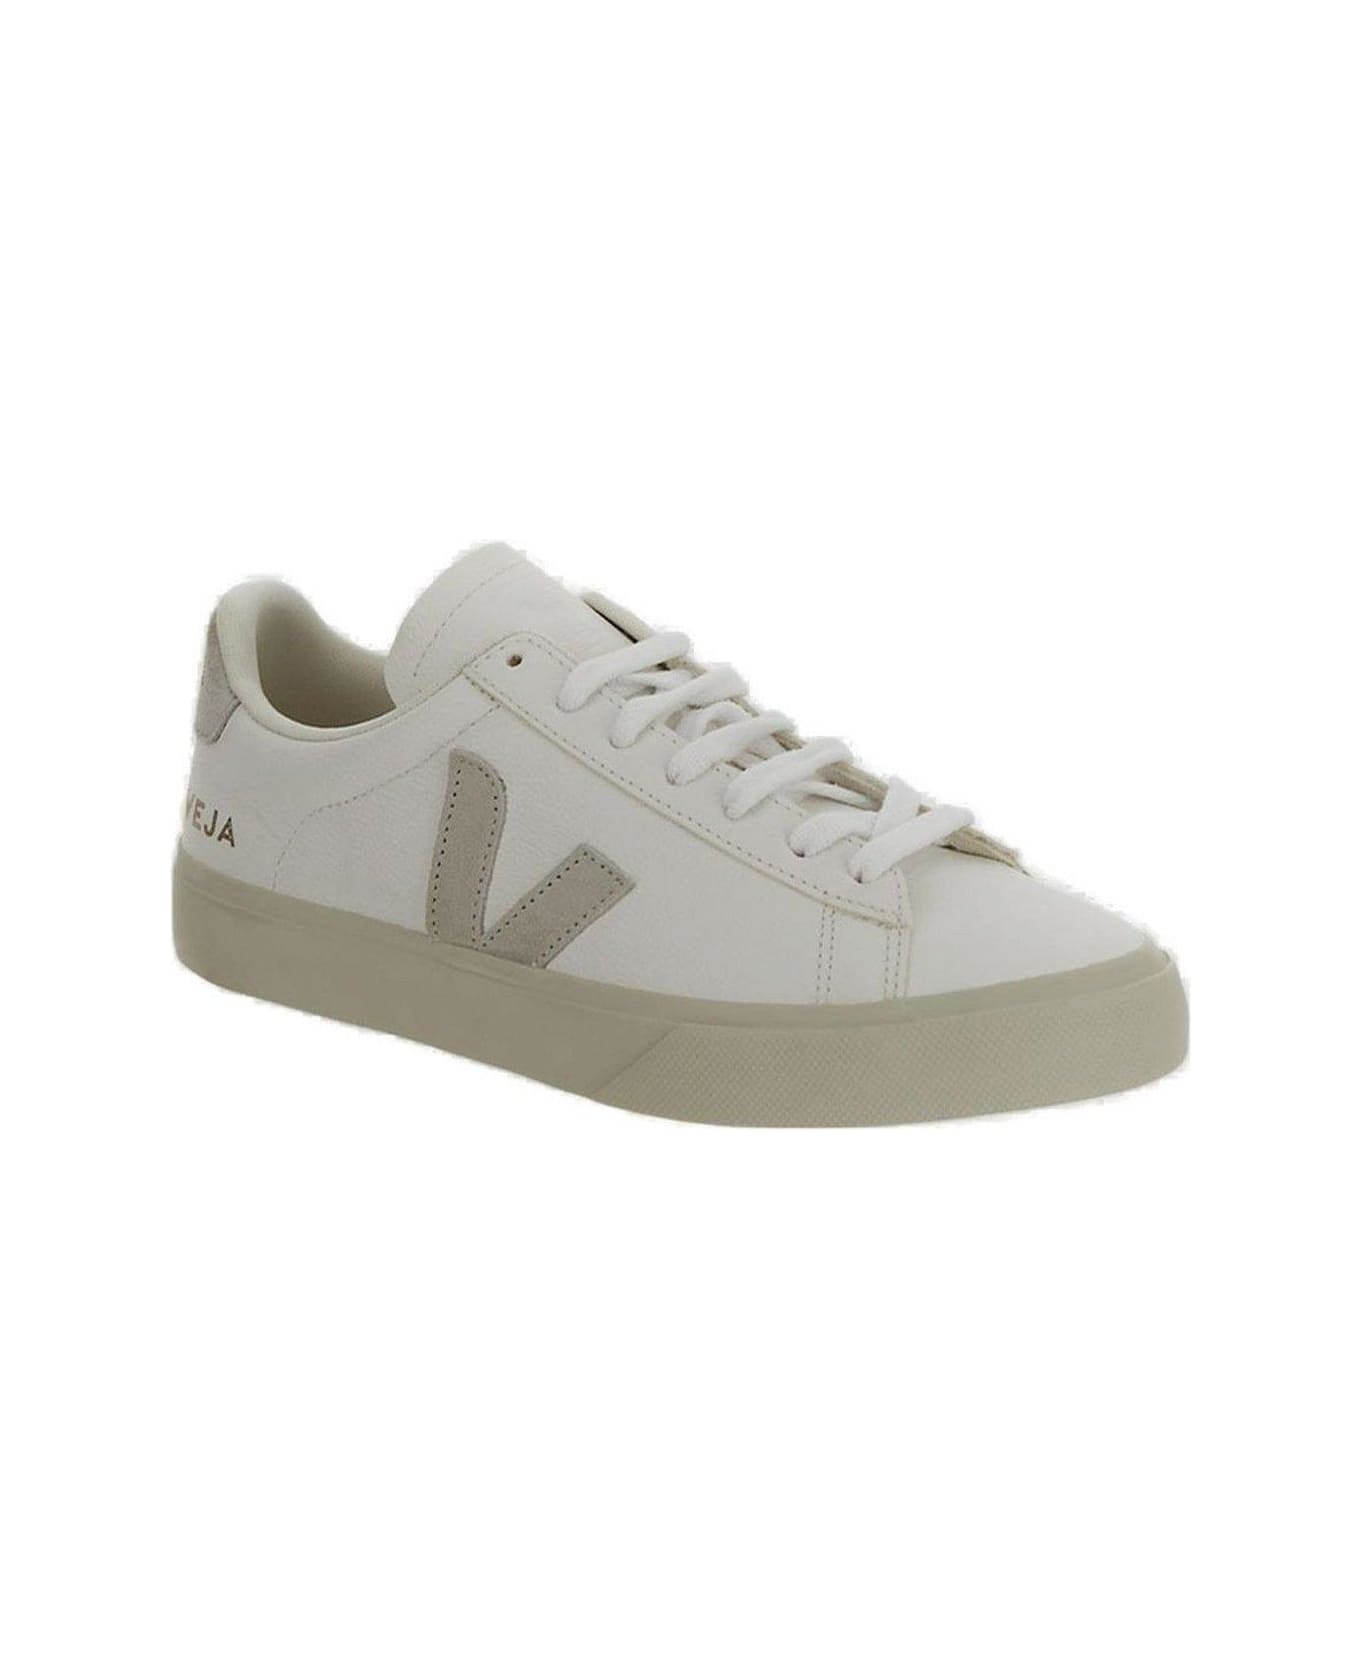 Veja Campo Low-top Sneakers - Natural スニーカー